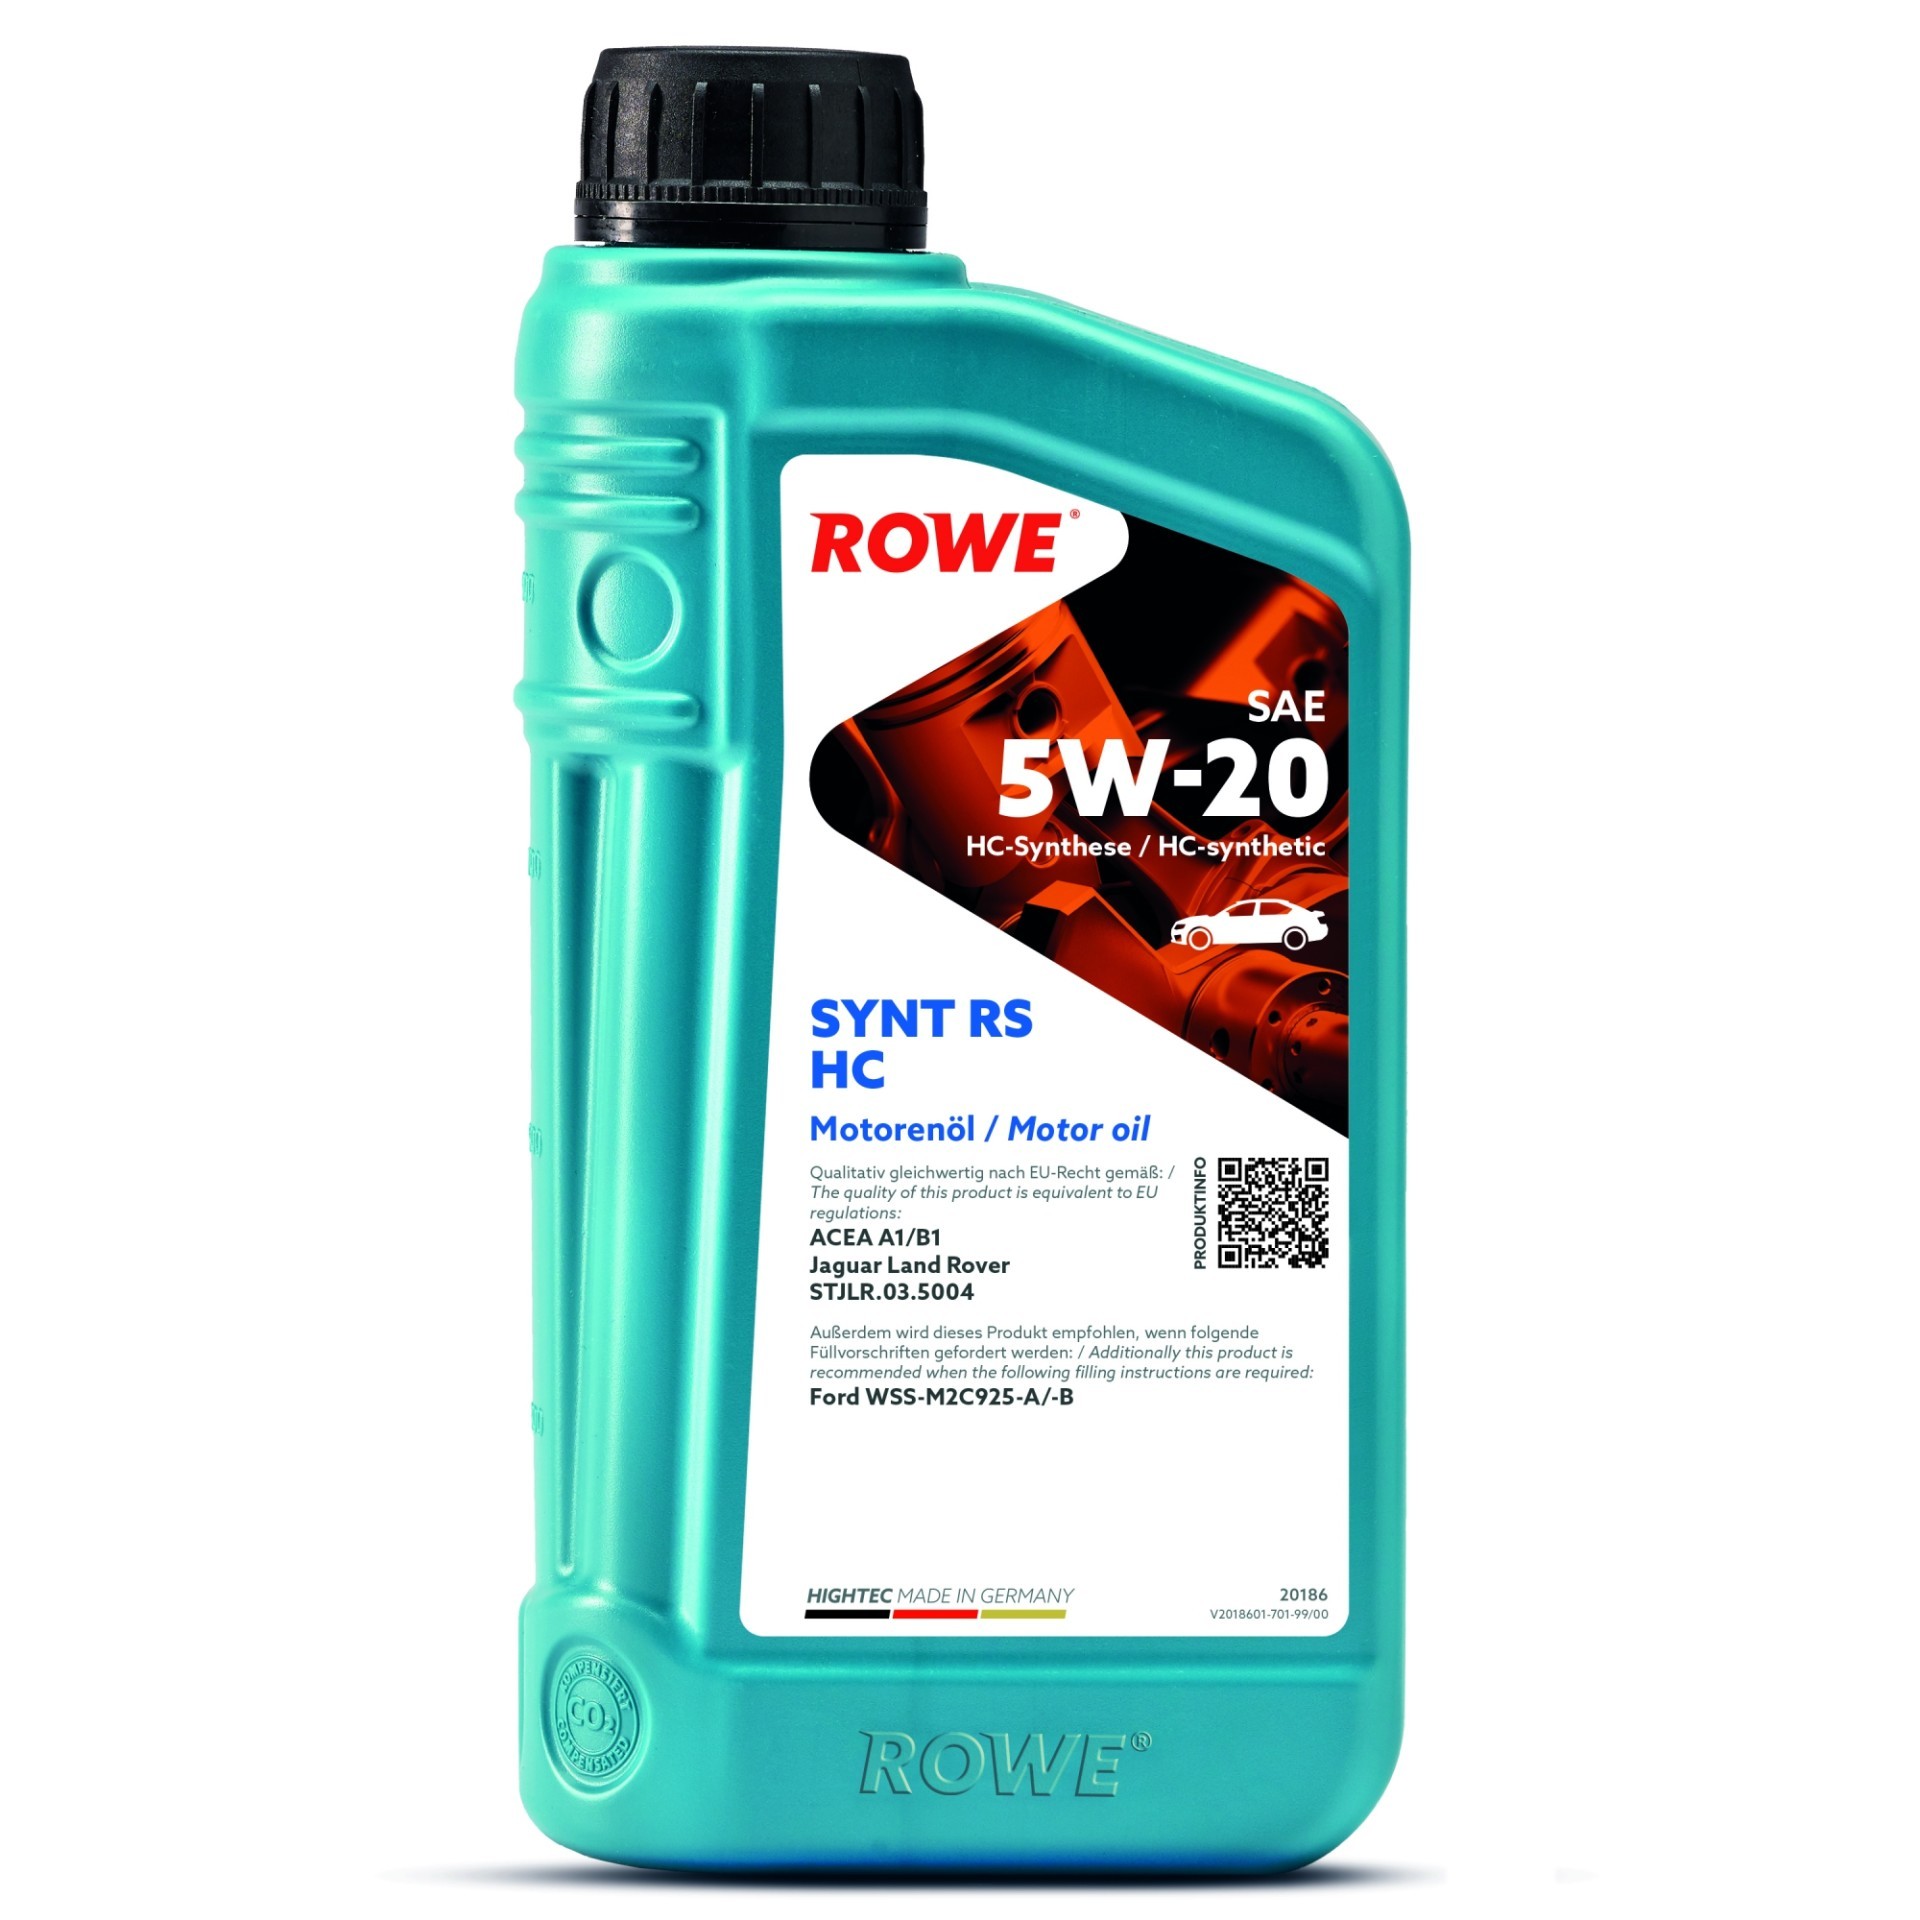 ROWE HIGHTEC SYNT RS HC SAE 5W-20 (20186) 1.0L